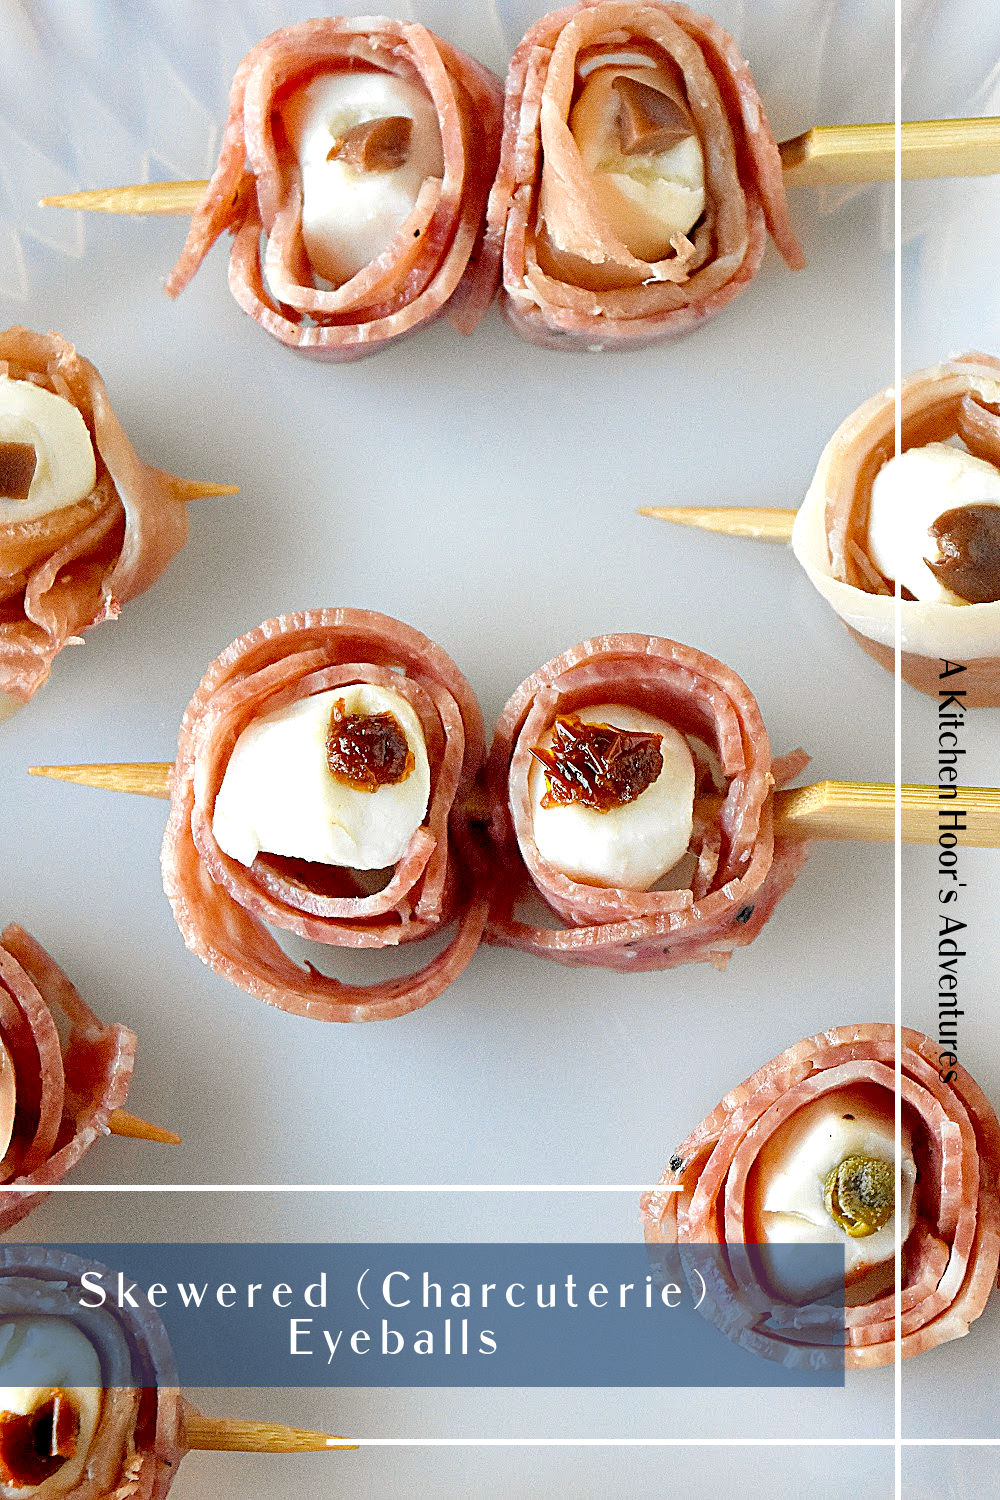 Skewered (Charcuterie) Eyeballs are perfect for your Halloween Board